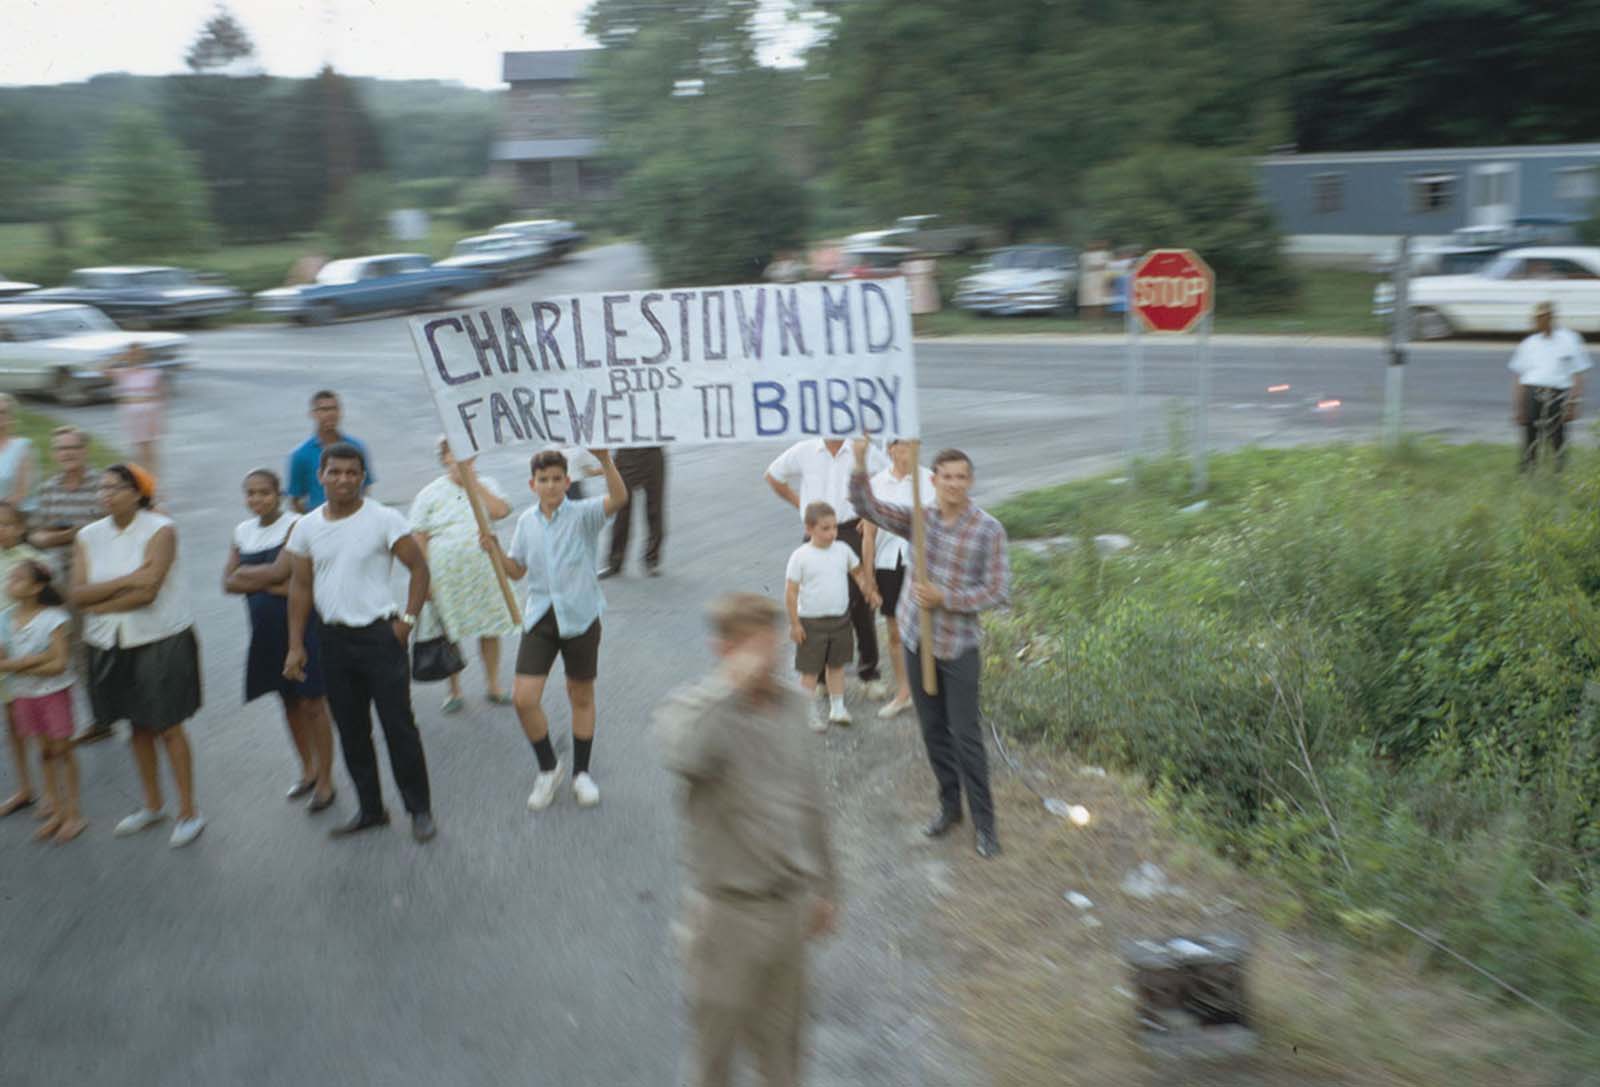 A sign is held up as the funeral train passes through Charlestown, Maryland, on June 8, 1968.